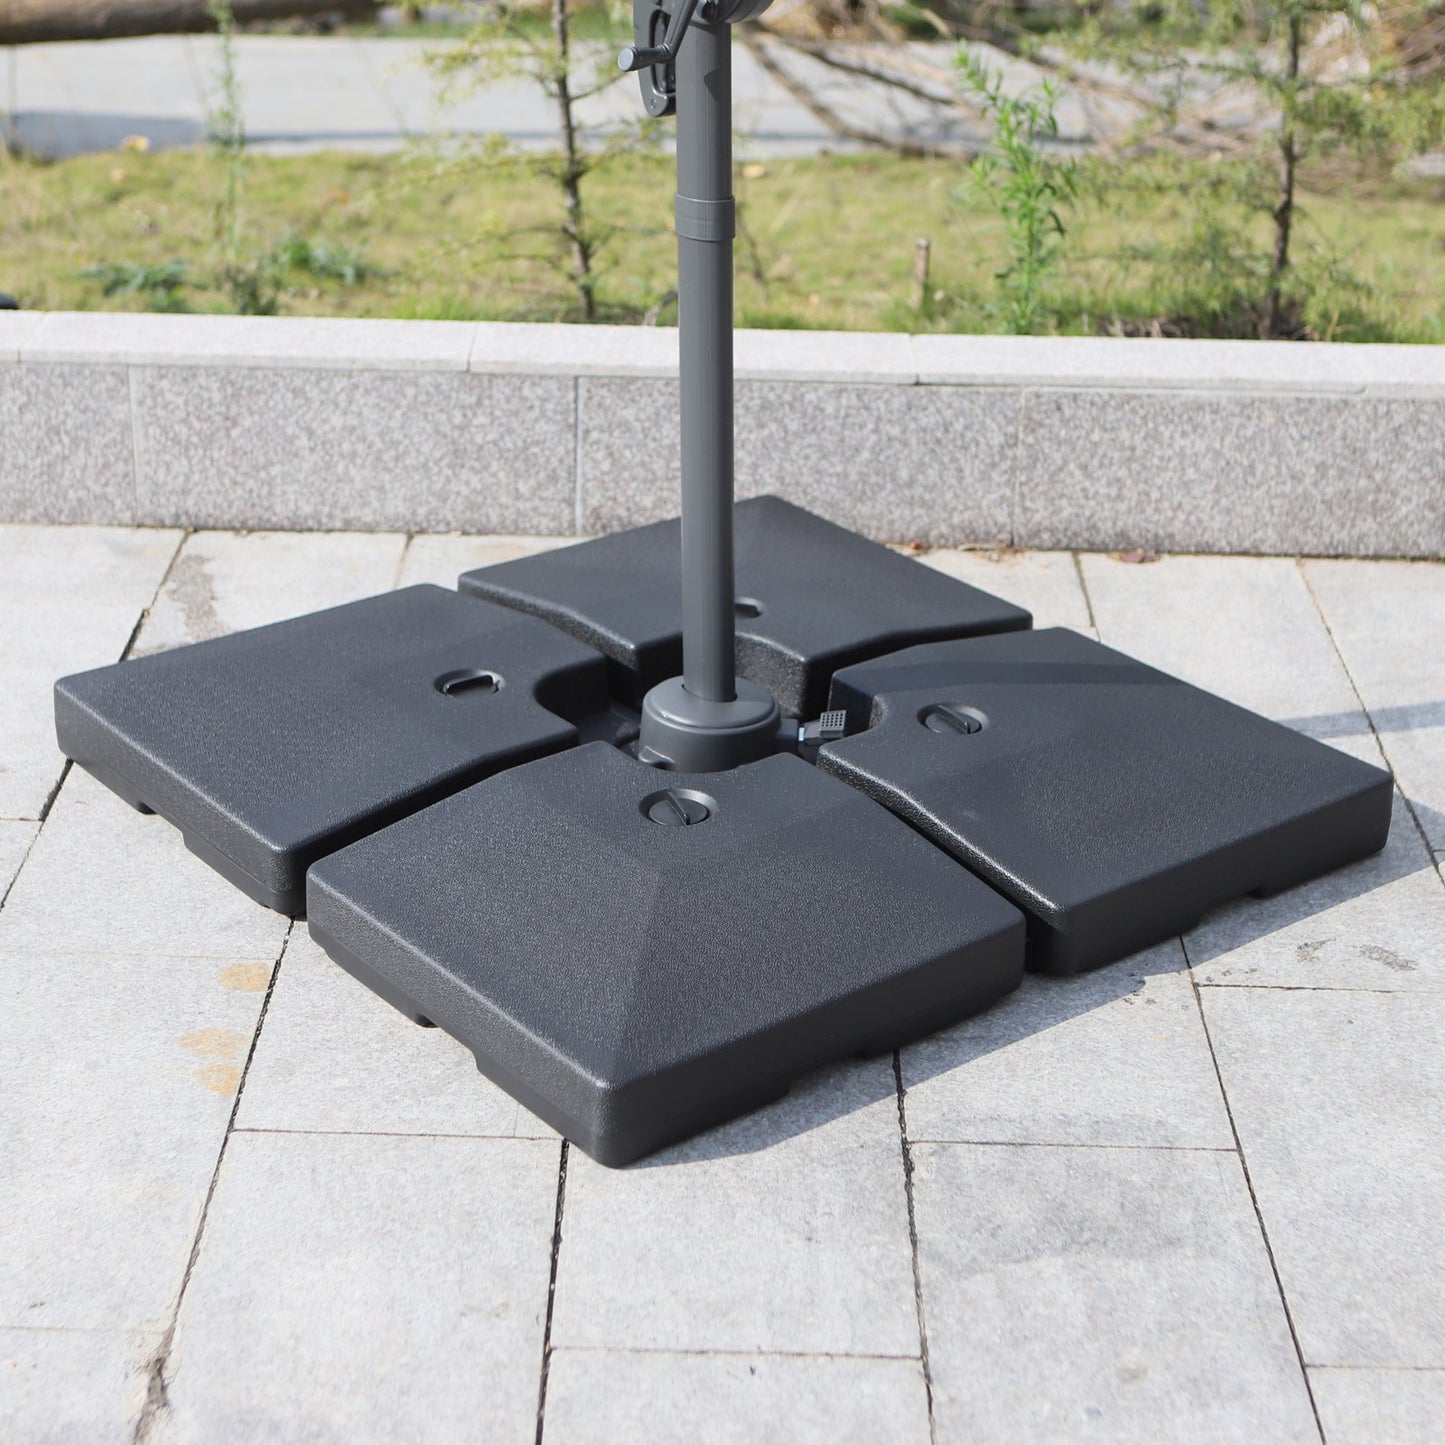 Large 4 Pieces Cantilever Patio Umbrella Base, Outdoor Umbrella Weights, 176 lbs Capacity Water or 264 lbs Capacity Sand Plates Set, Black